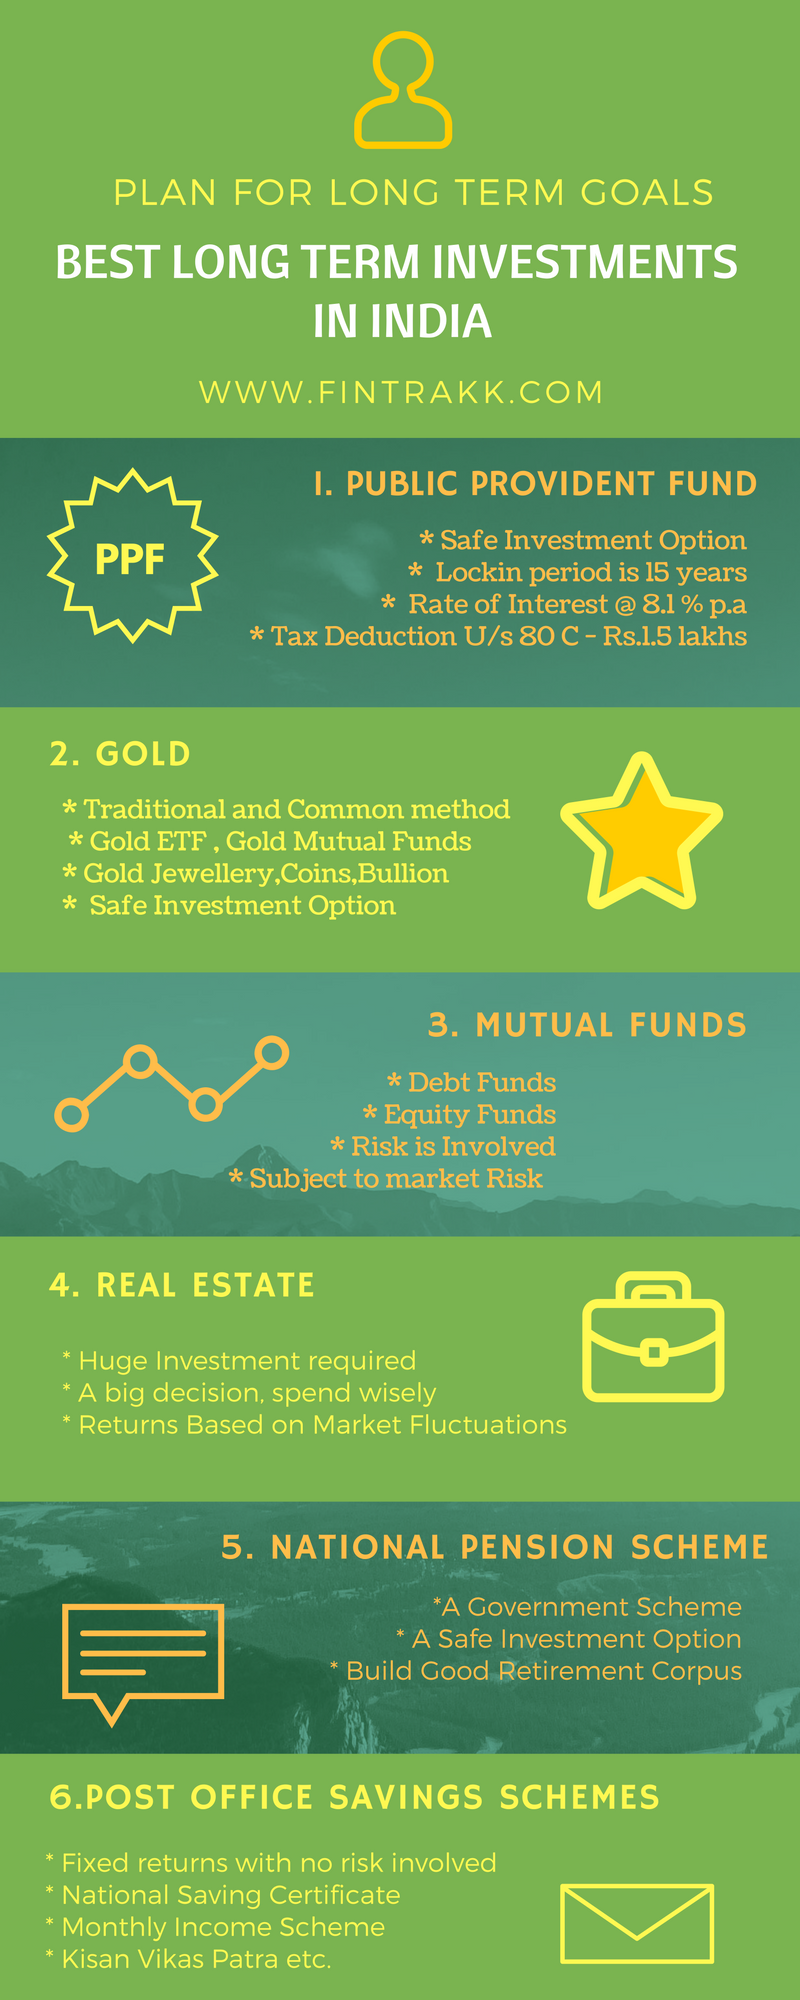 Best Long Term Investments in India Infographic ! Fintrakk